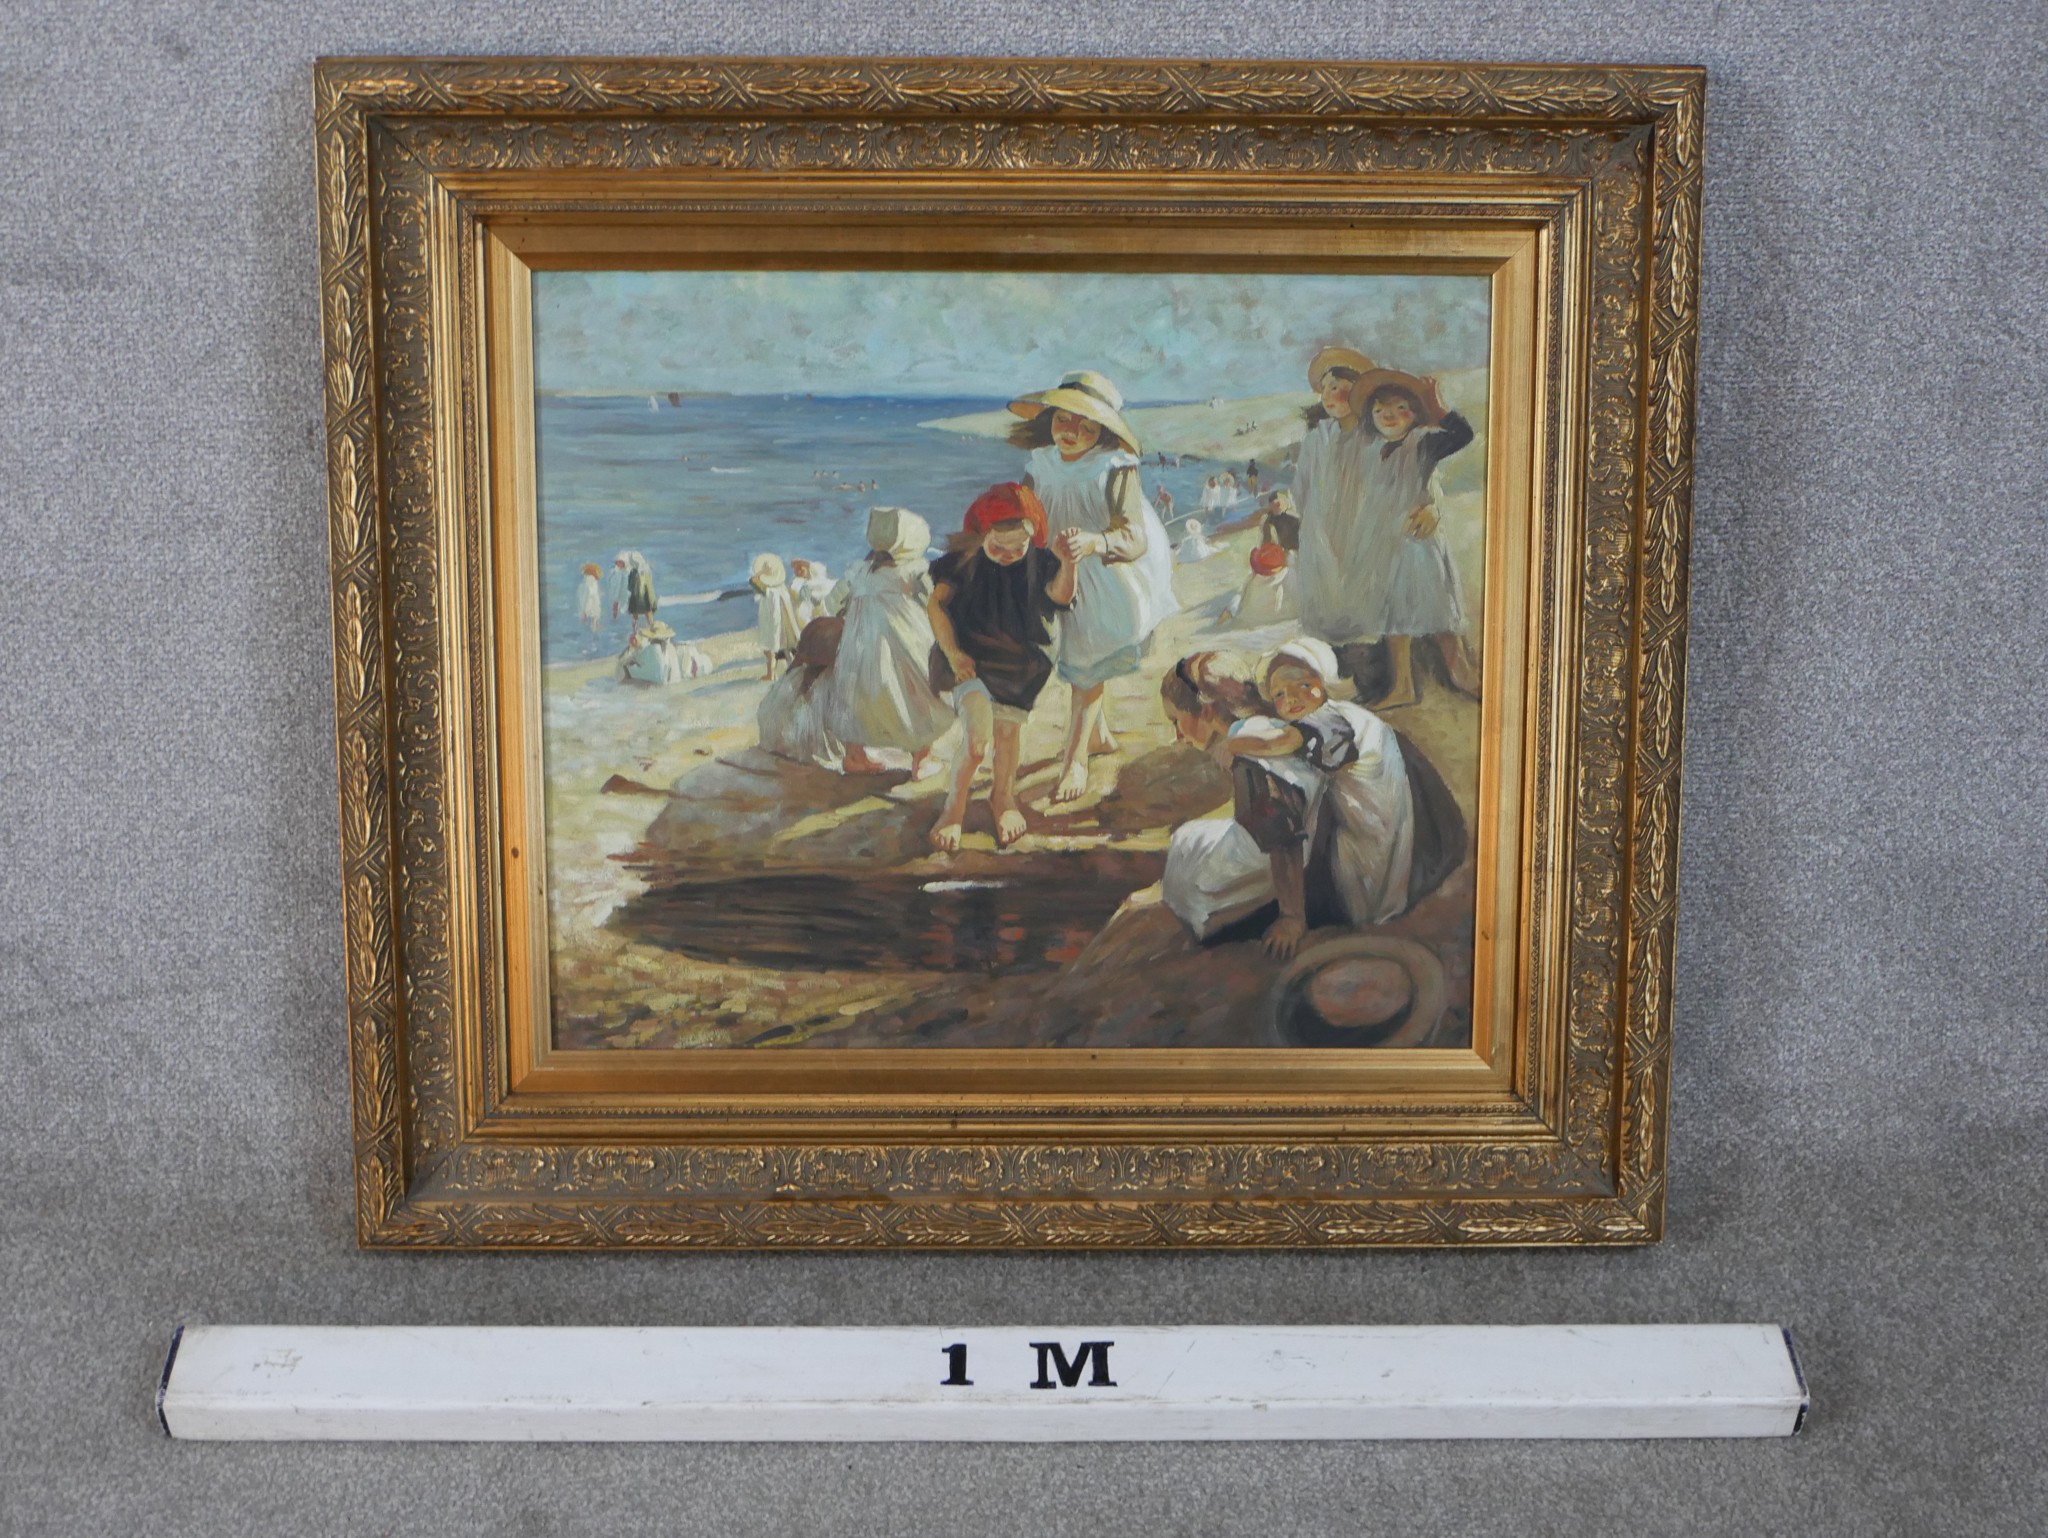 20th century, British school, children playing on the beach, oil on board, gilt framed. H.76 W.86cm - Image 5 of 6